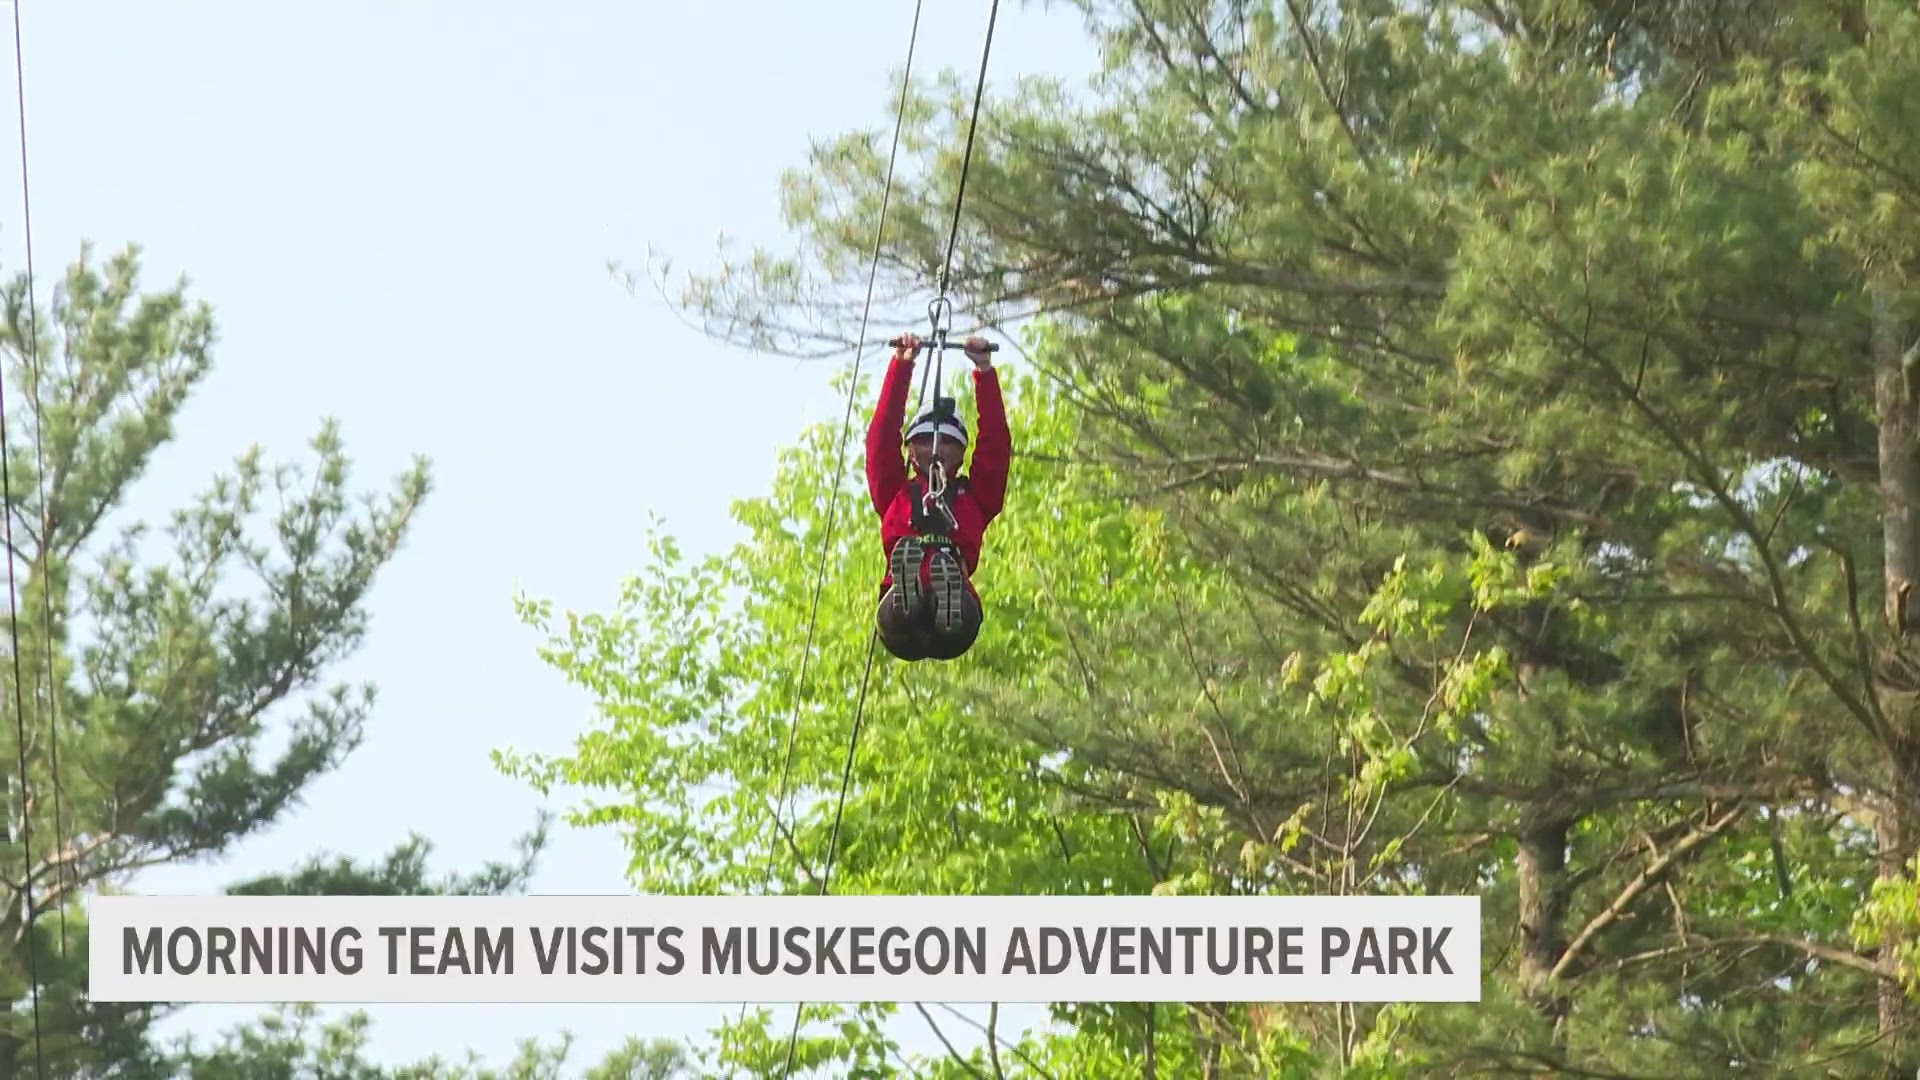 The park features everything from ziplining to rock climbing to archery.